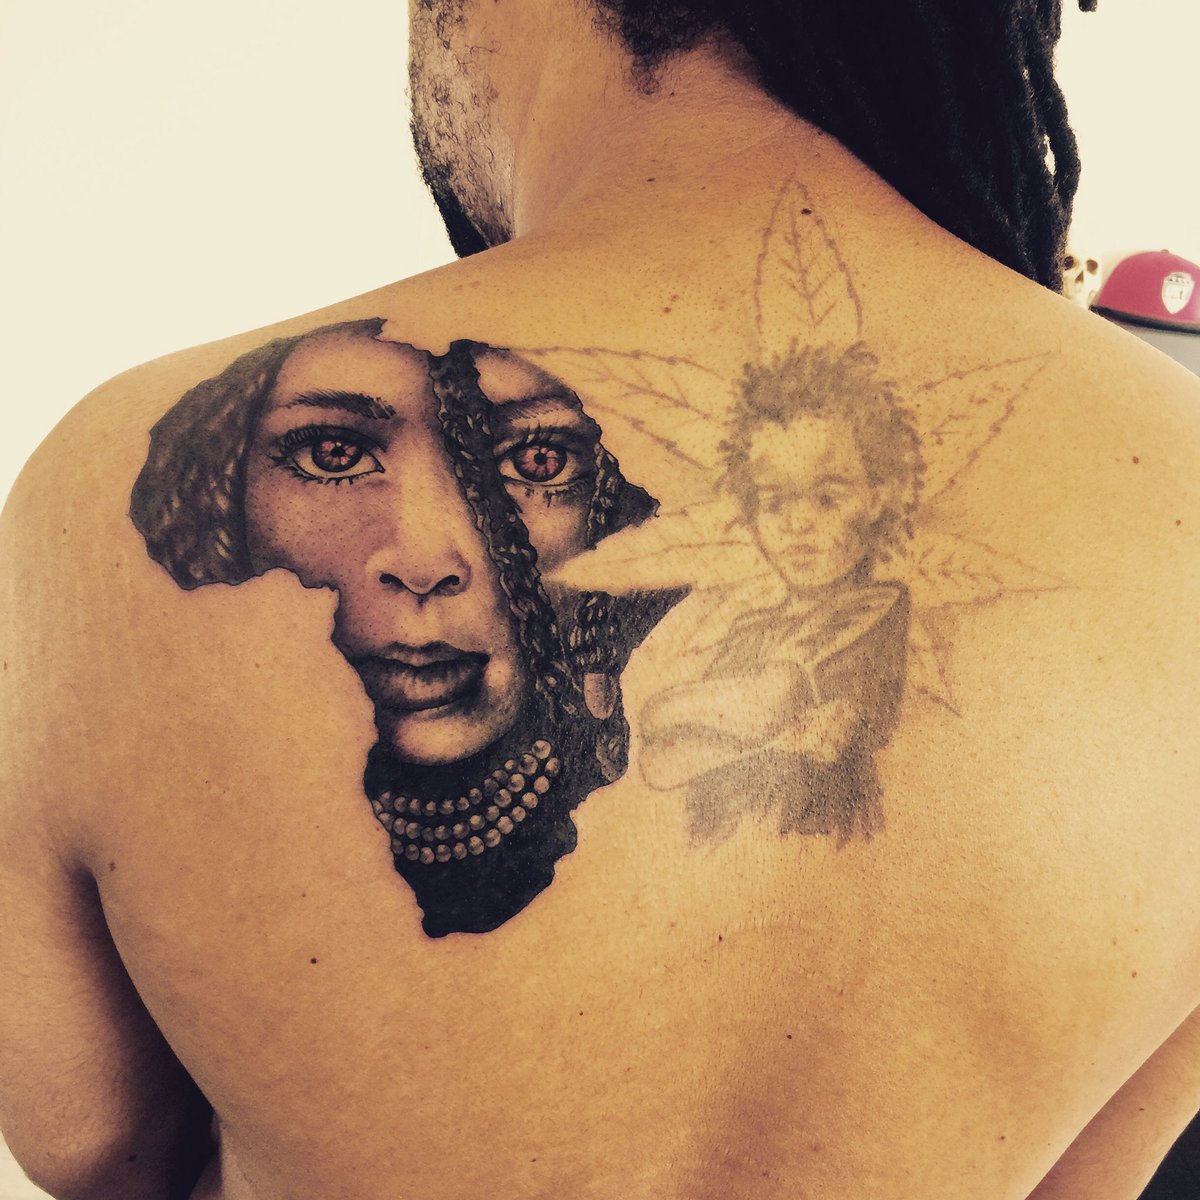 All sizes | Pirates of Caribbean tattoo | Flickr - Photo Sharing!